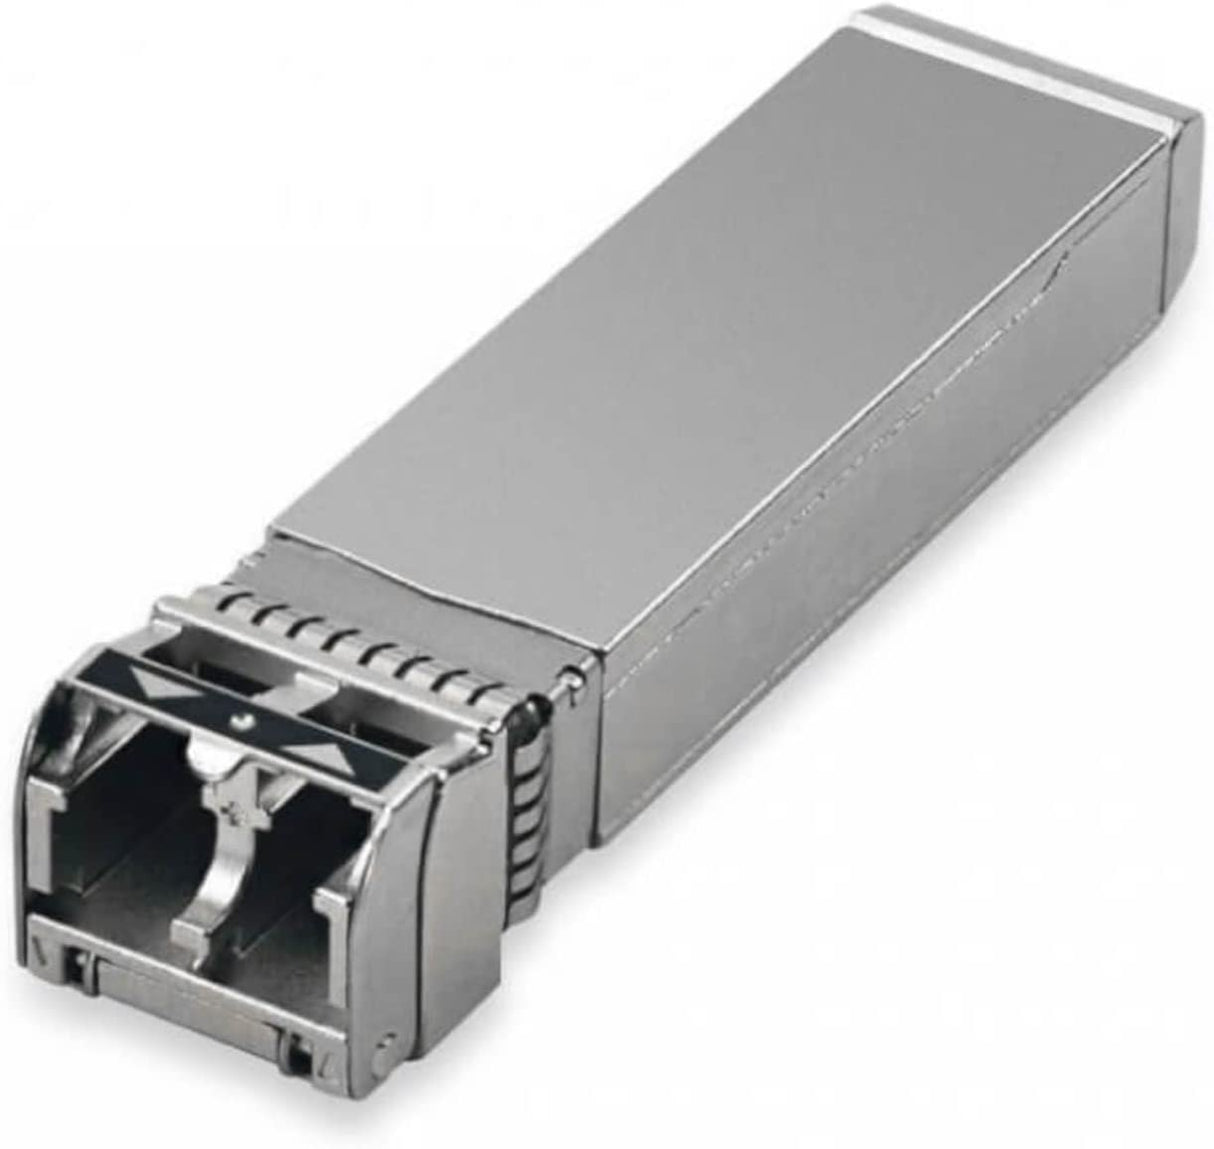 Solarflare 25GB ETHERNET Low Latency SR SFP28 Optical TRANSCEIVER